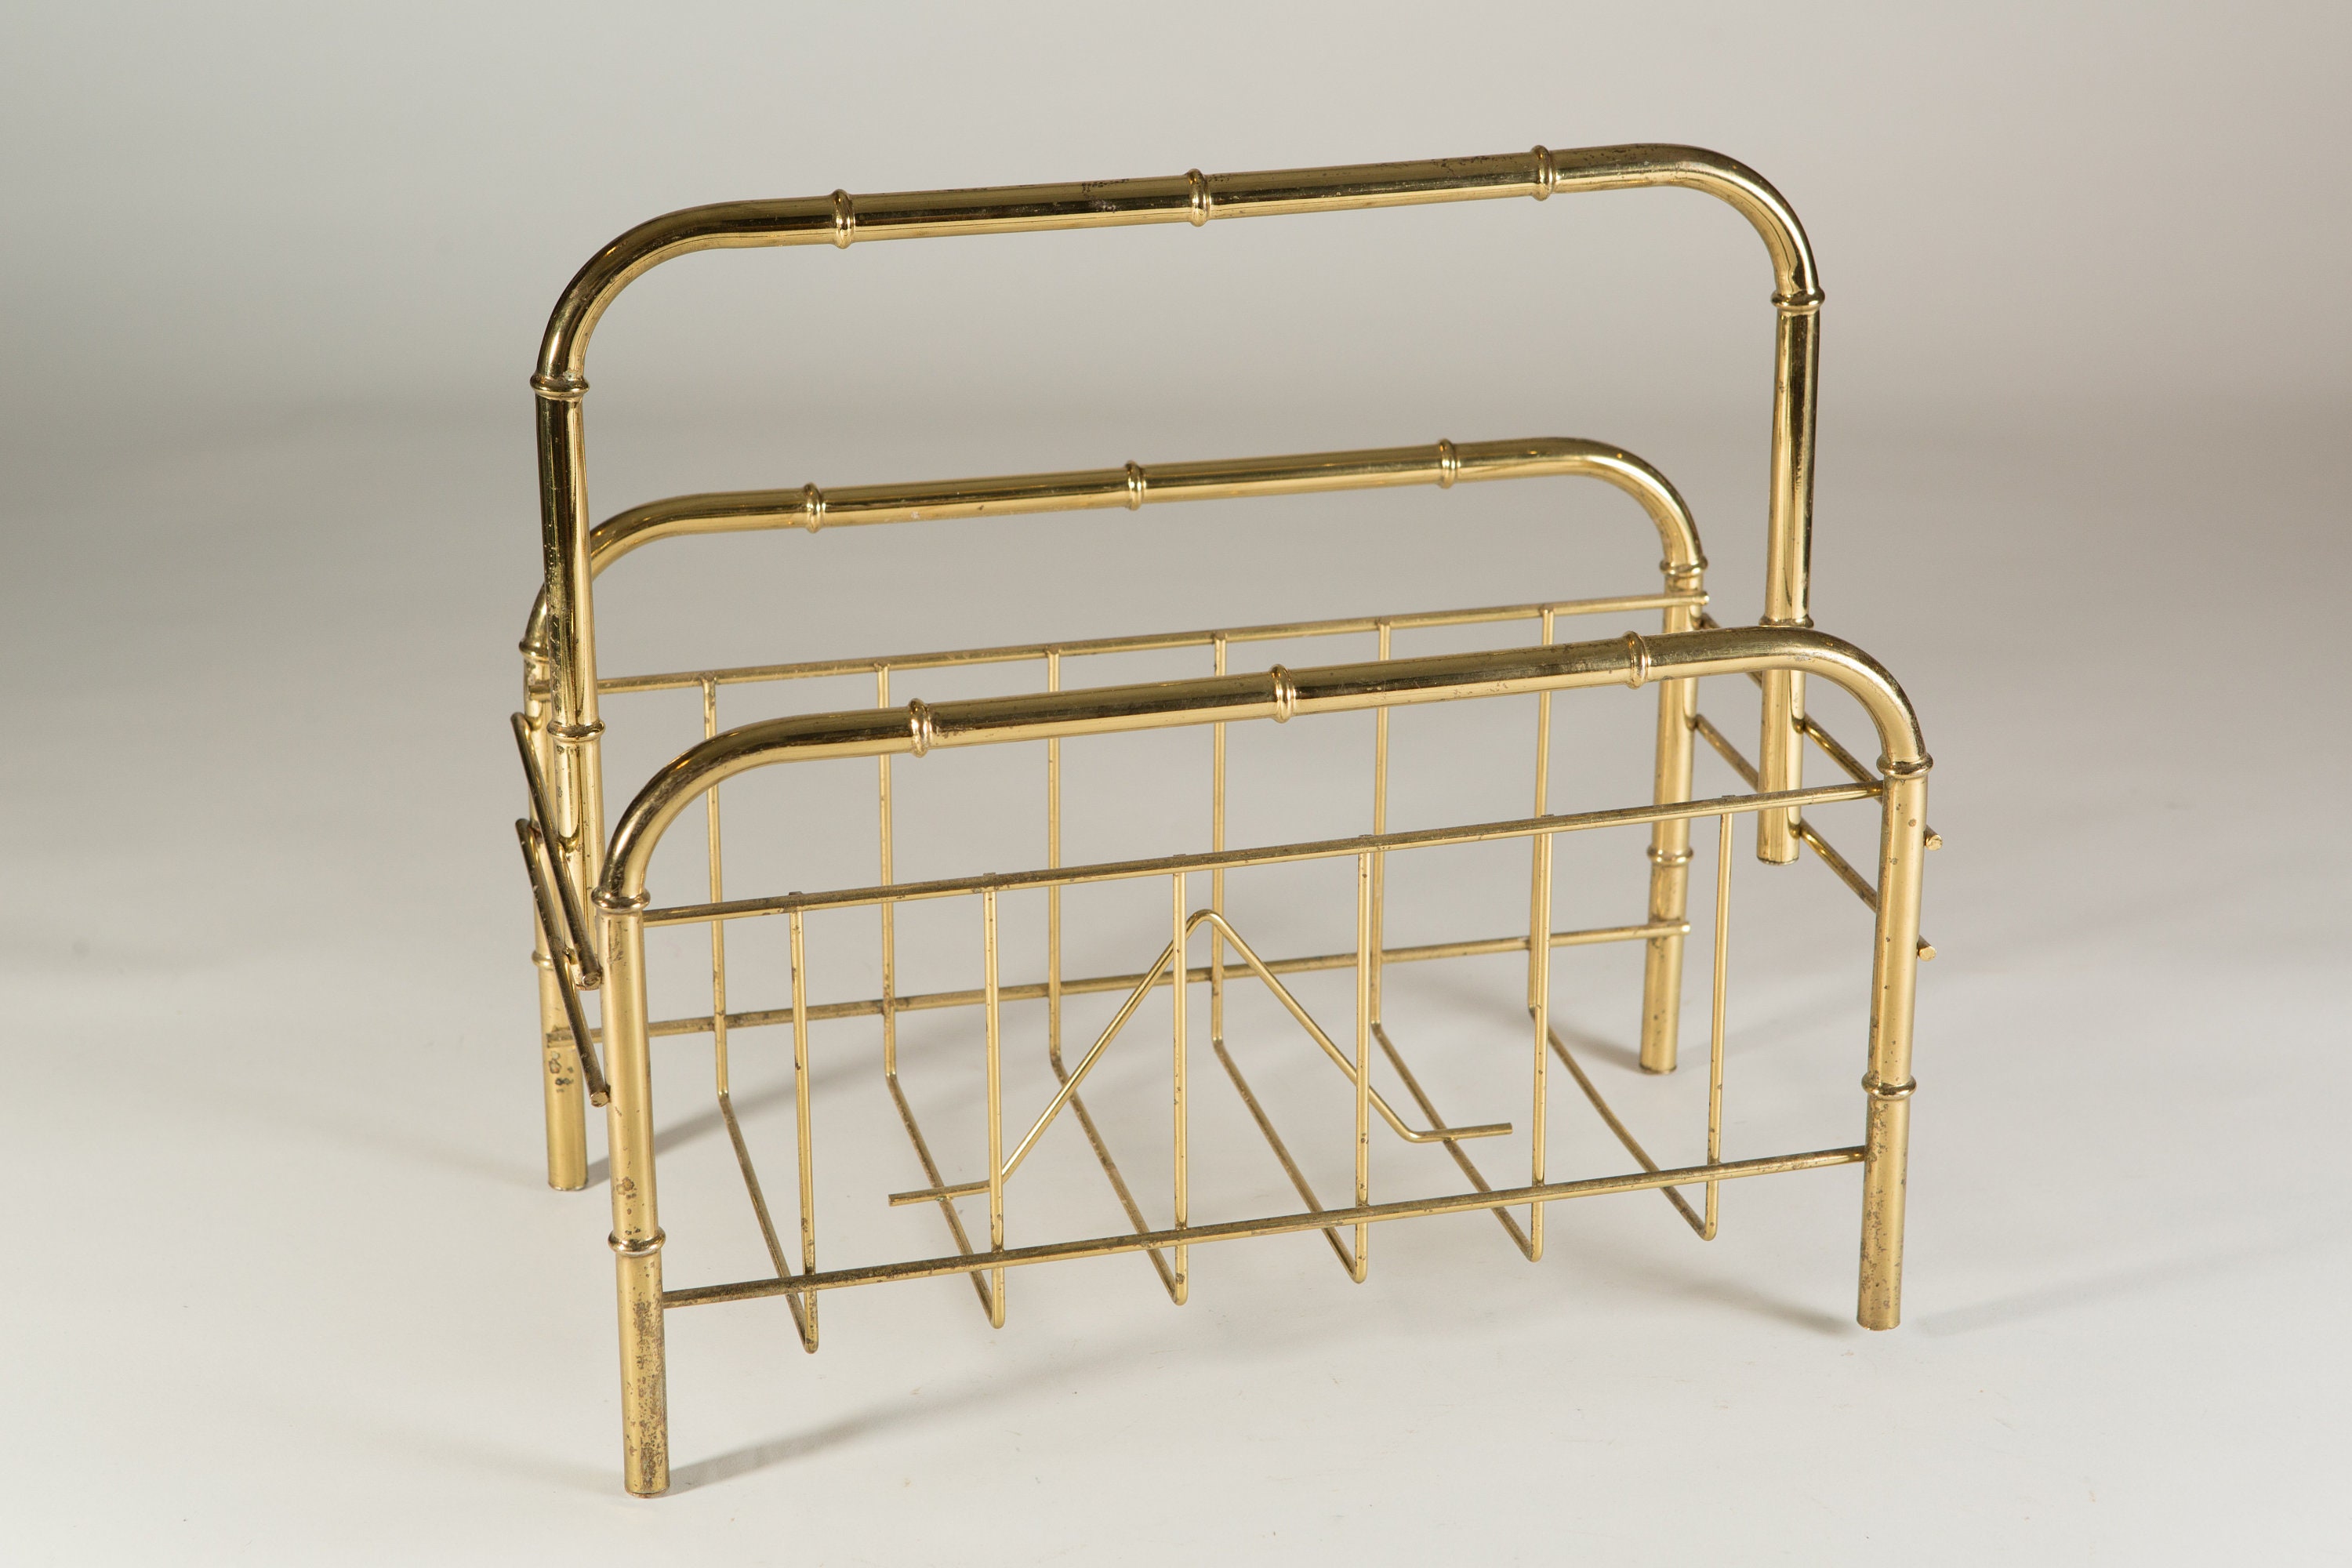 Brass Magazine Rack - Bamboo Style Gold Coloured Vintage Metal